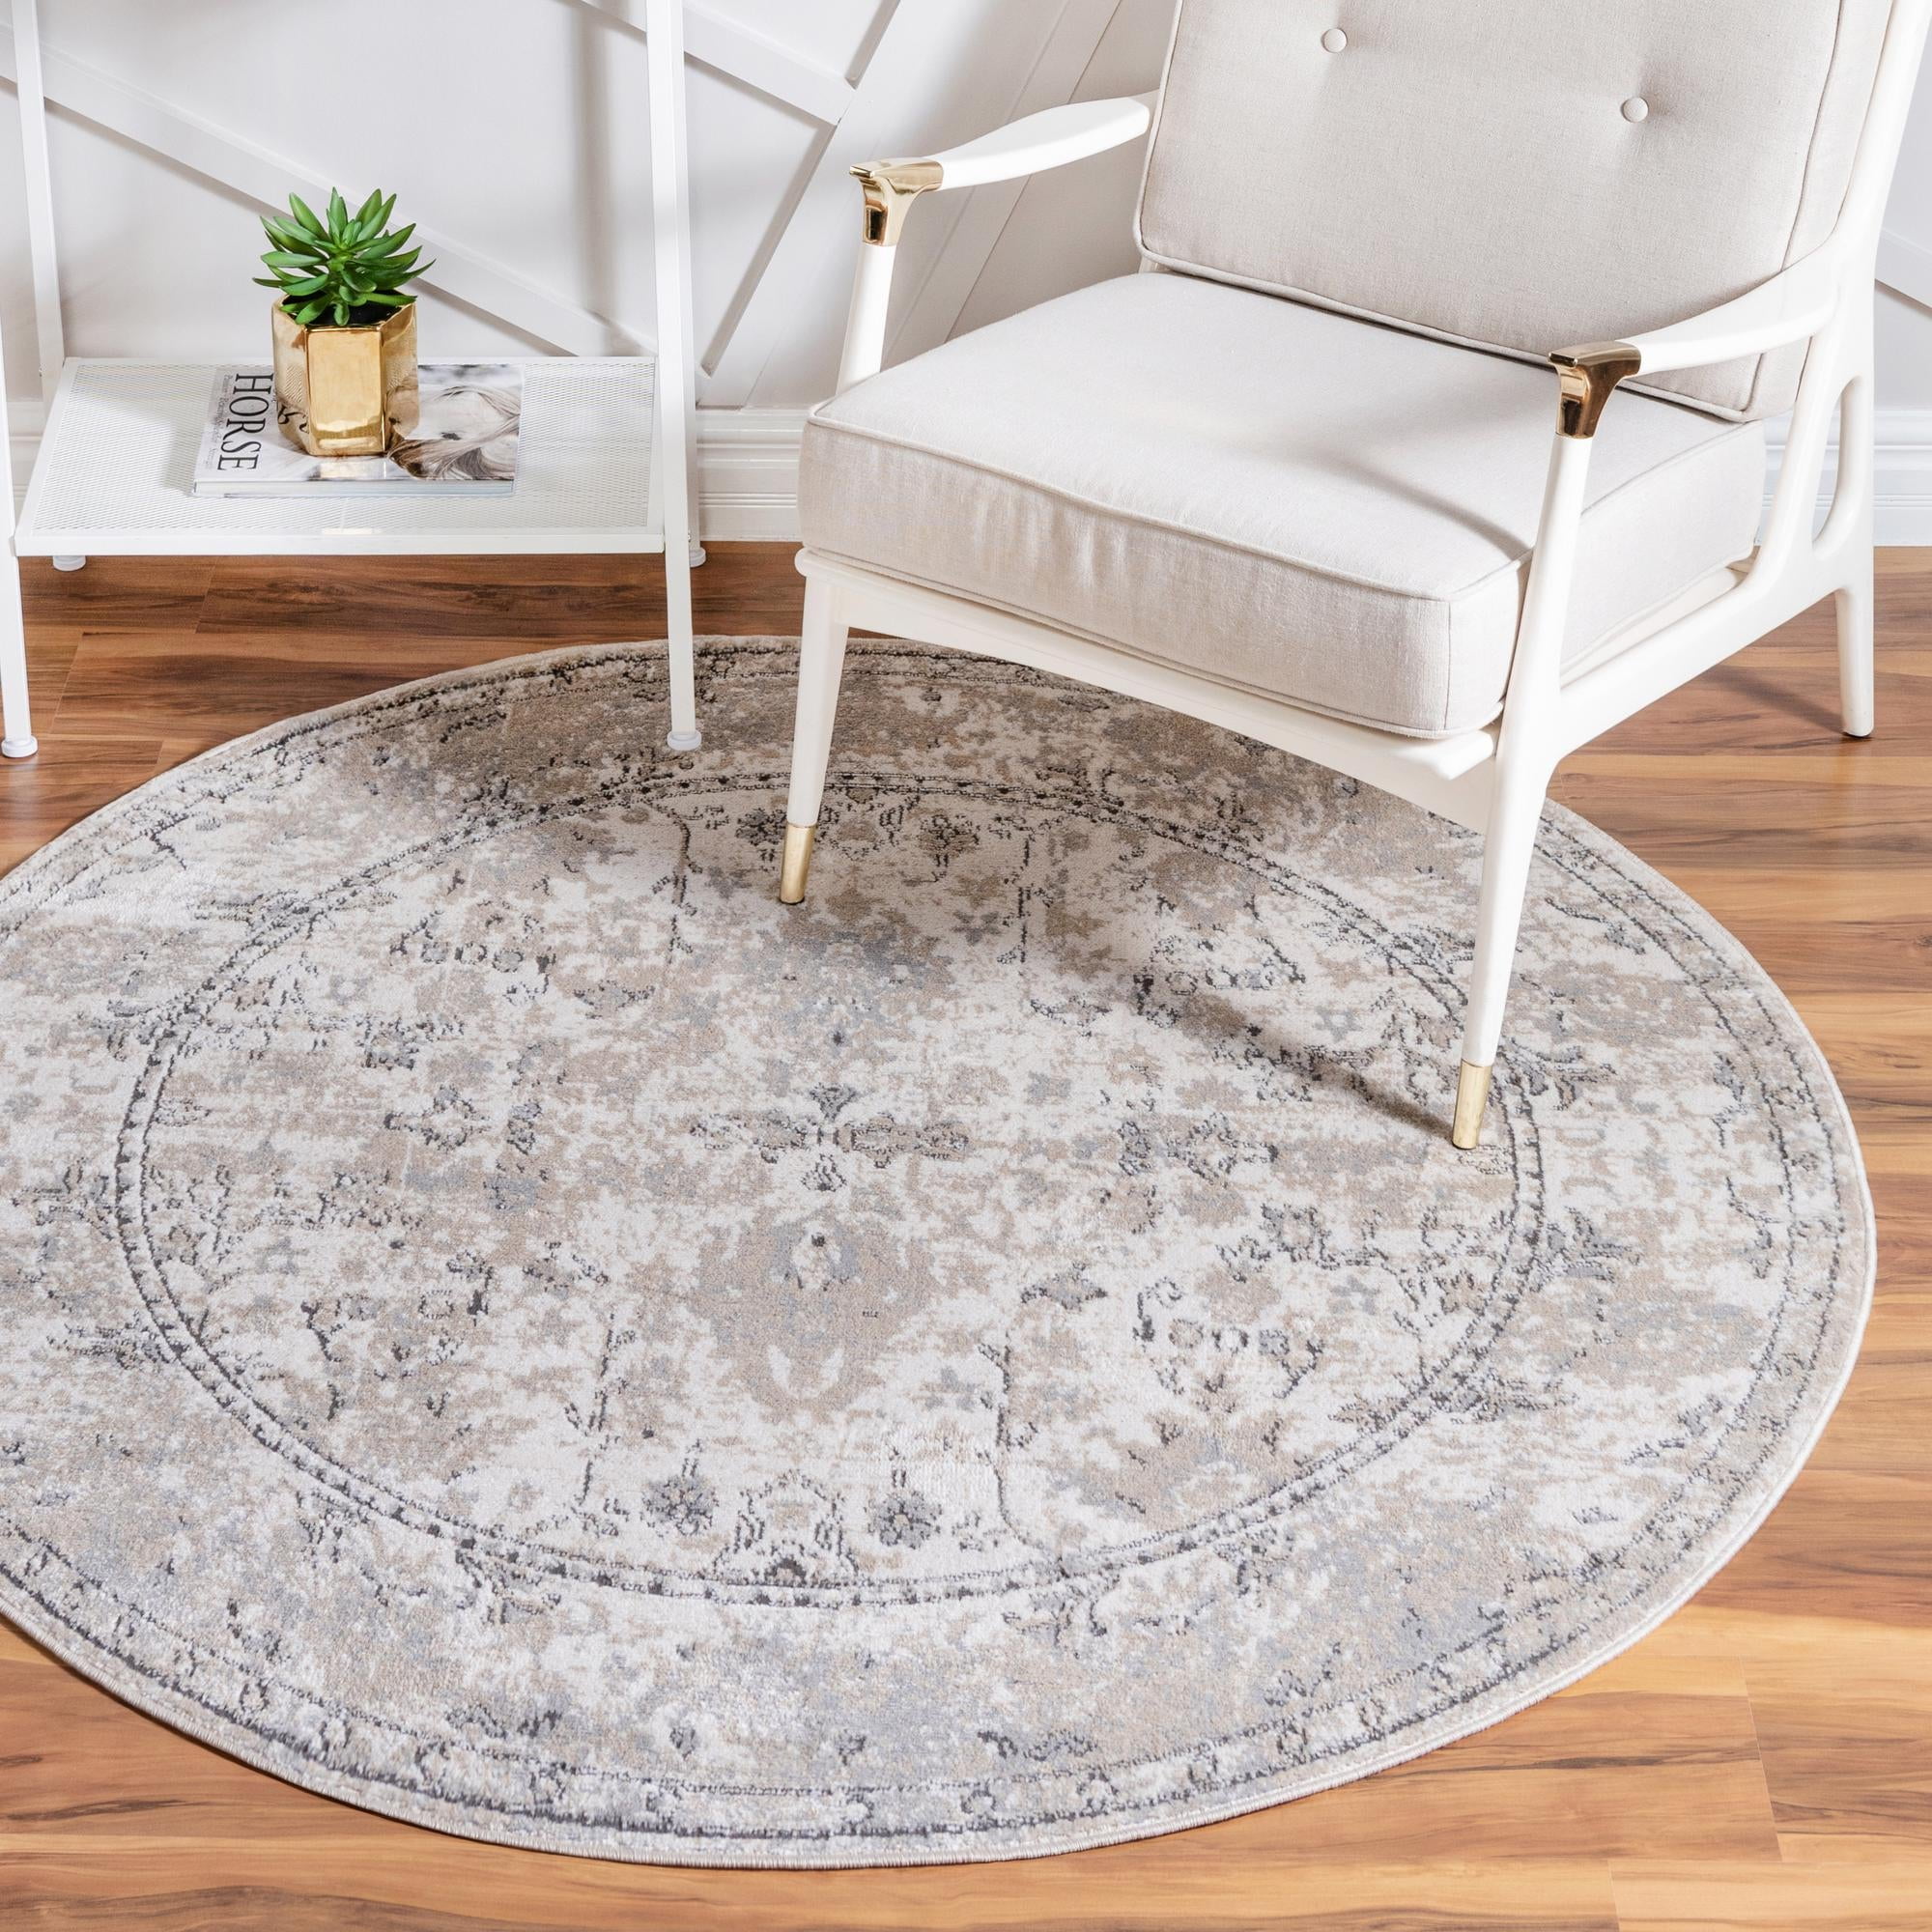 5 Ft Round Gray Low-Pile Rug Perfect for Kitchens Dining Rooms Rugs.com Oregon Collection Rug 